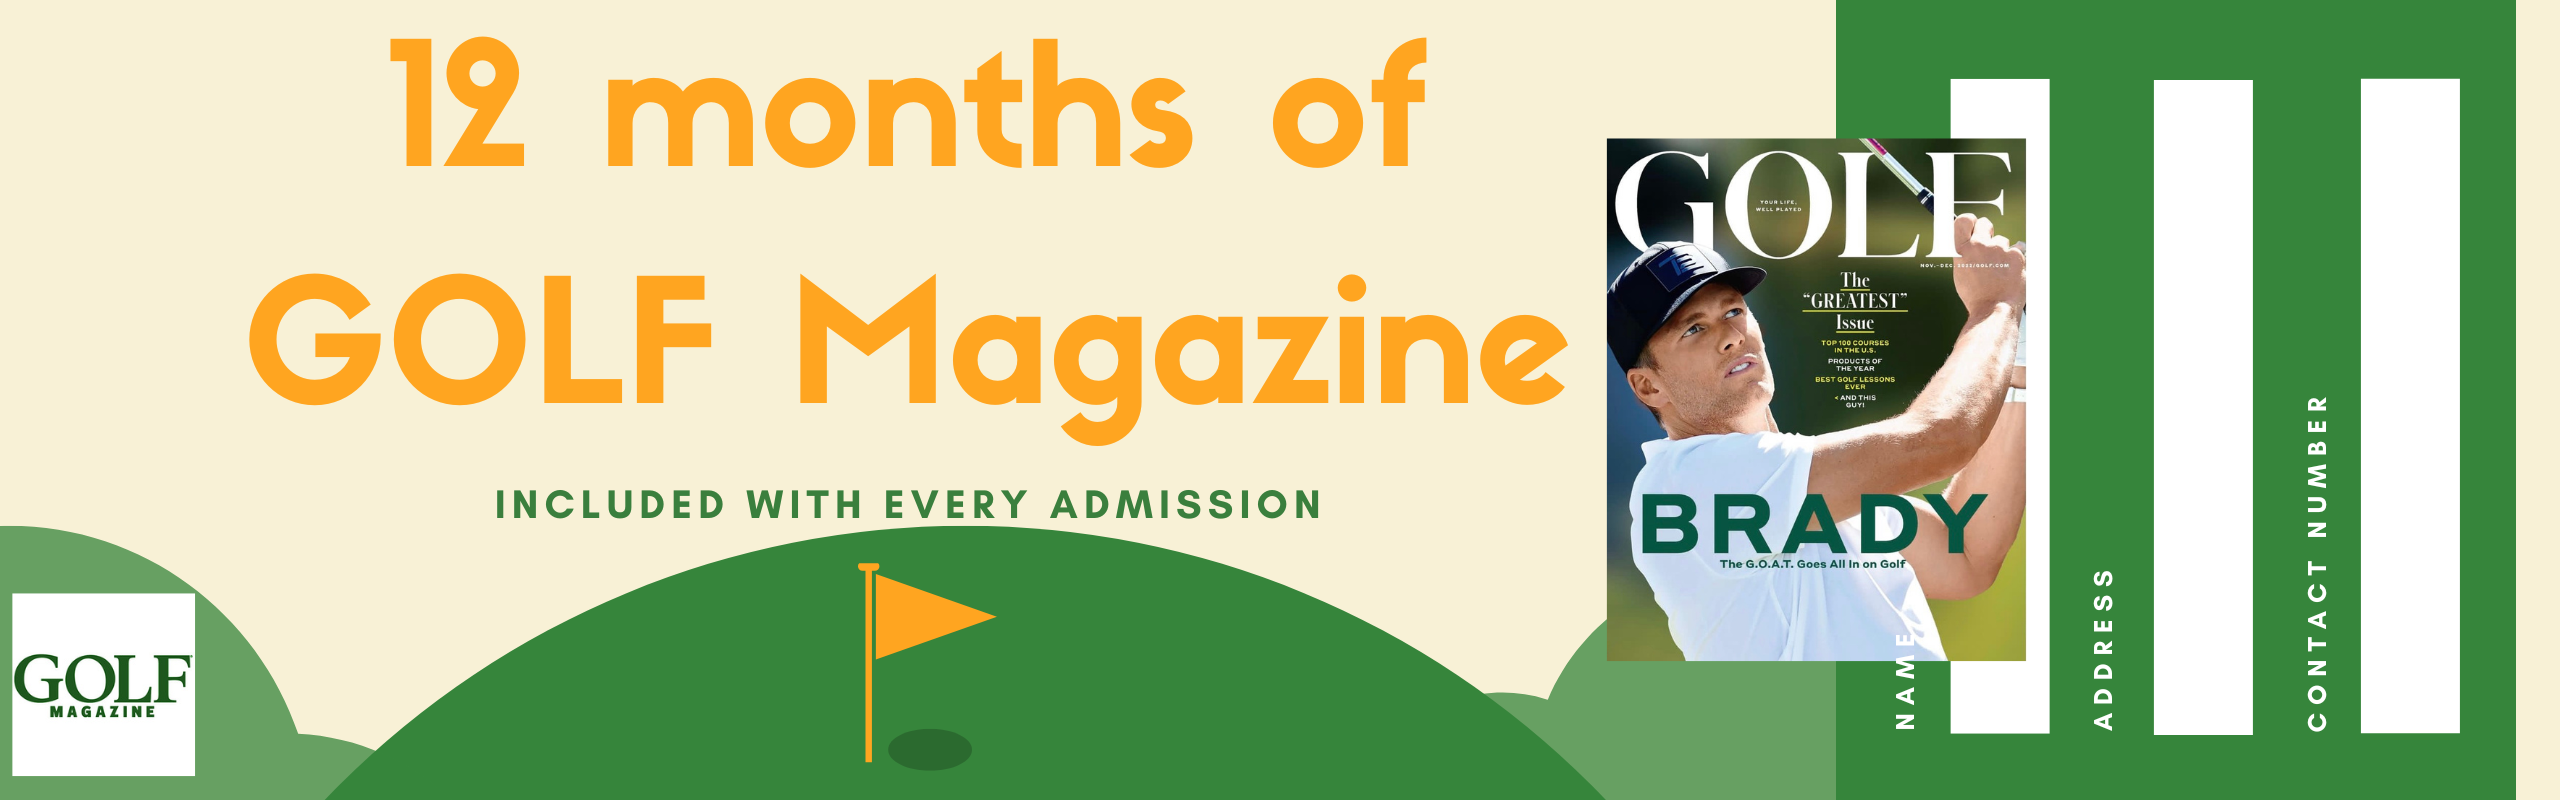 12 months of Golf Magazine included with every admission